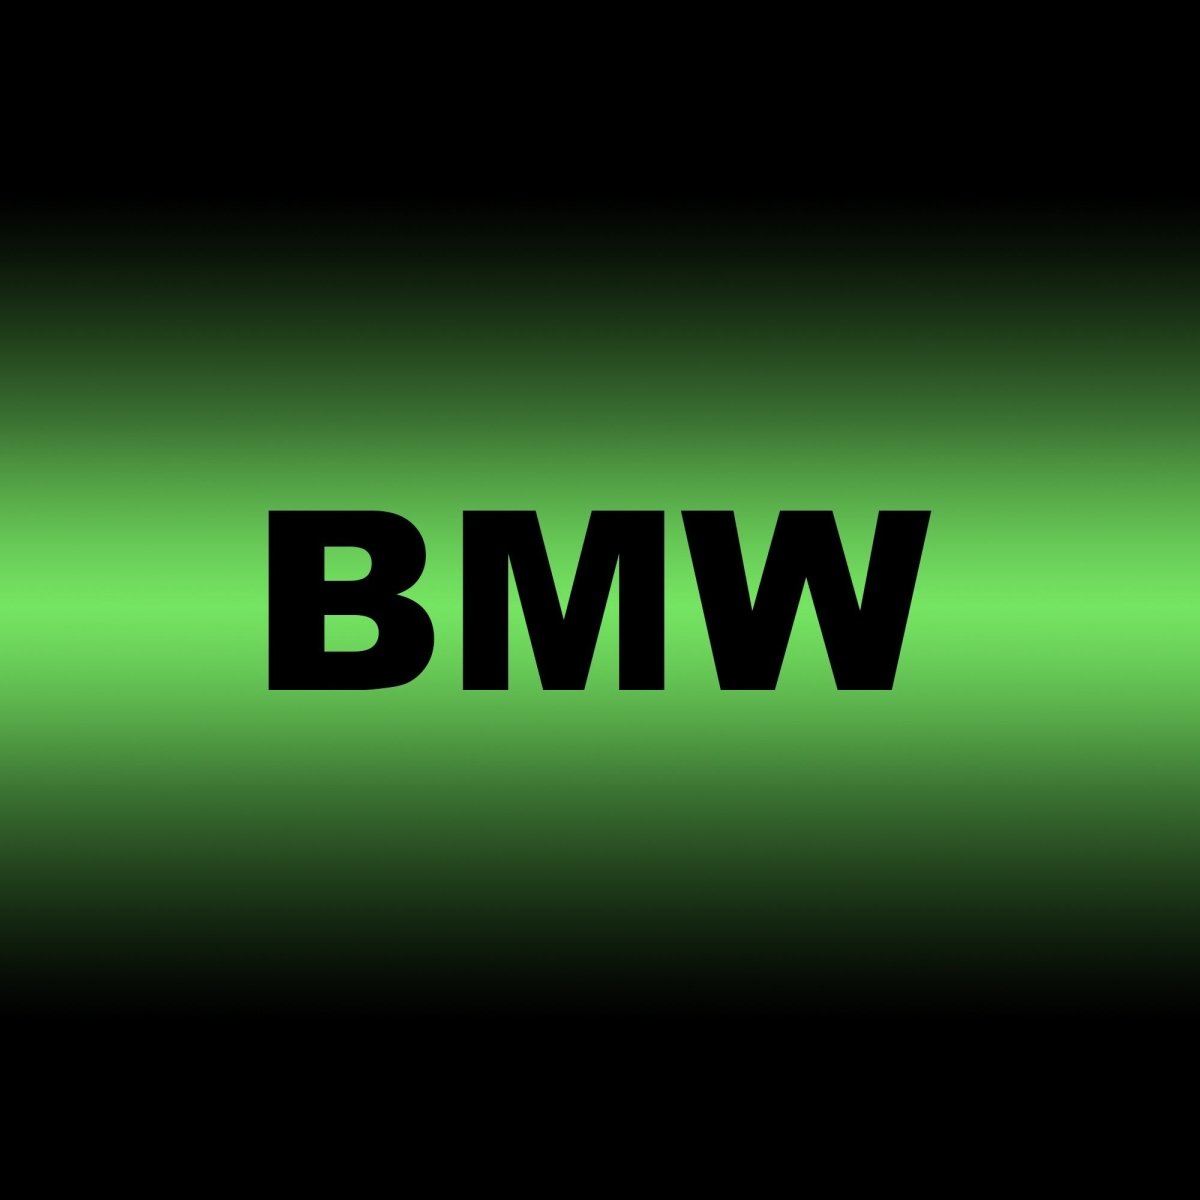 Tailored Car Boot Liner for BMW - Protect Your Boot from Dirt and Damage - Green Flag Shop